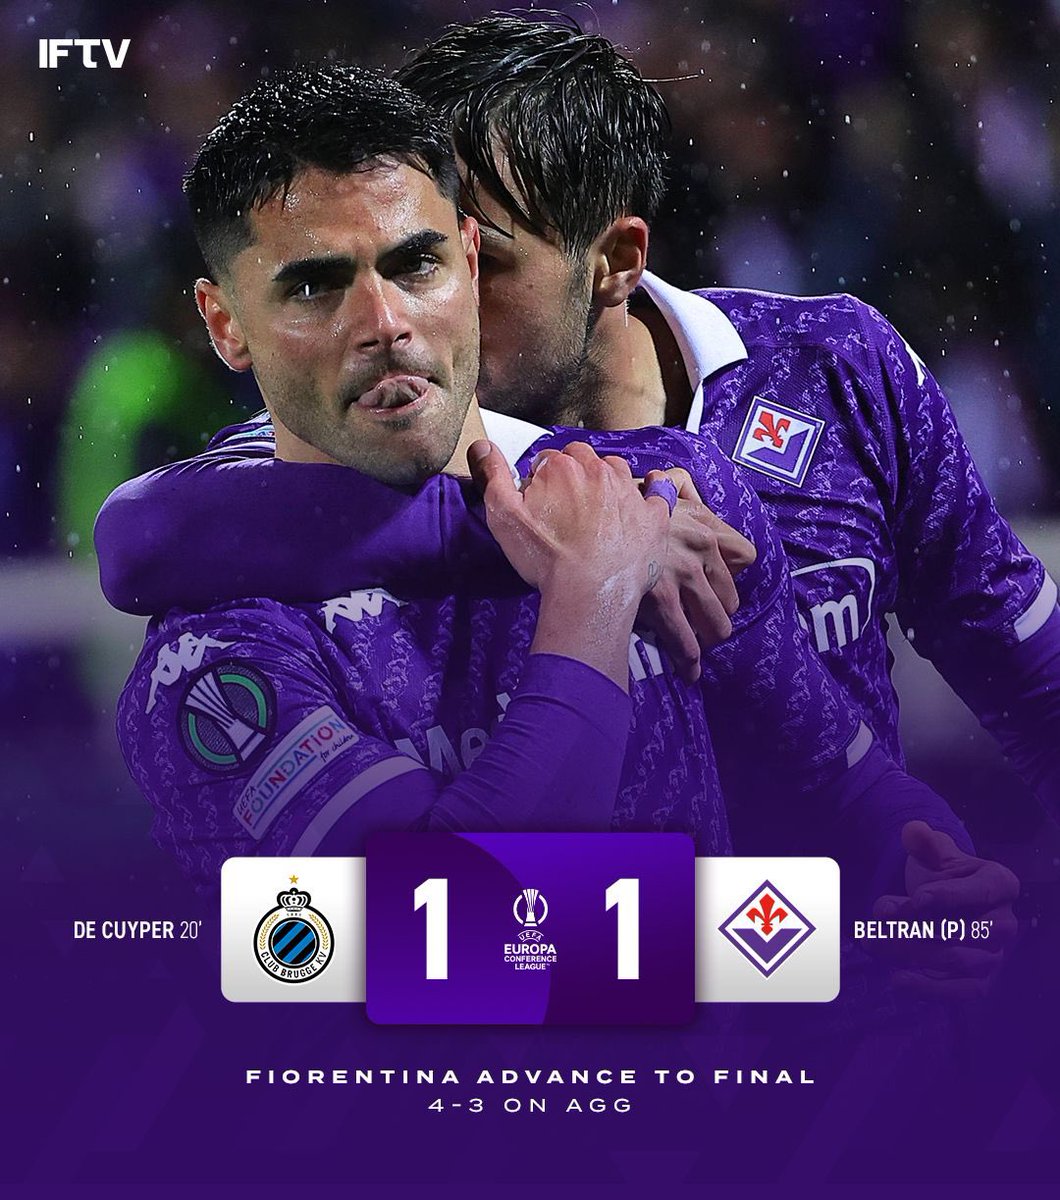 FIORENTINA MAKE IT TO THE CONFERENCE LEAGUE FINAL FOR THE SECOND TIME IN A ROW ⚜️ They’ll play the winner of Aston Villa/Olympiakos in Athens. Do it for Joe 🙏